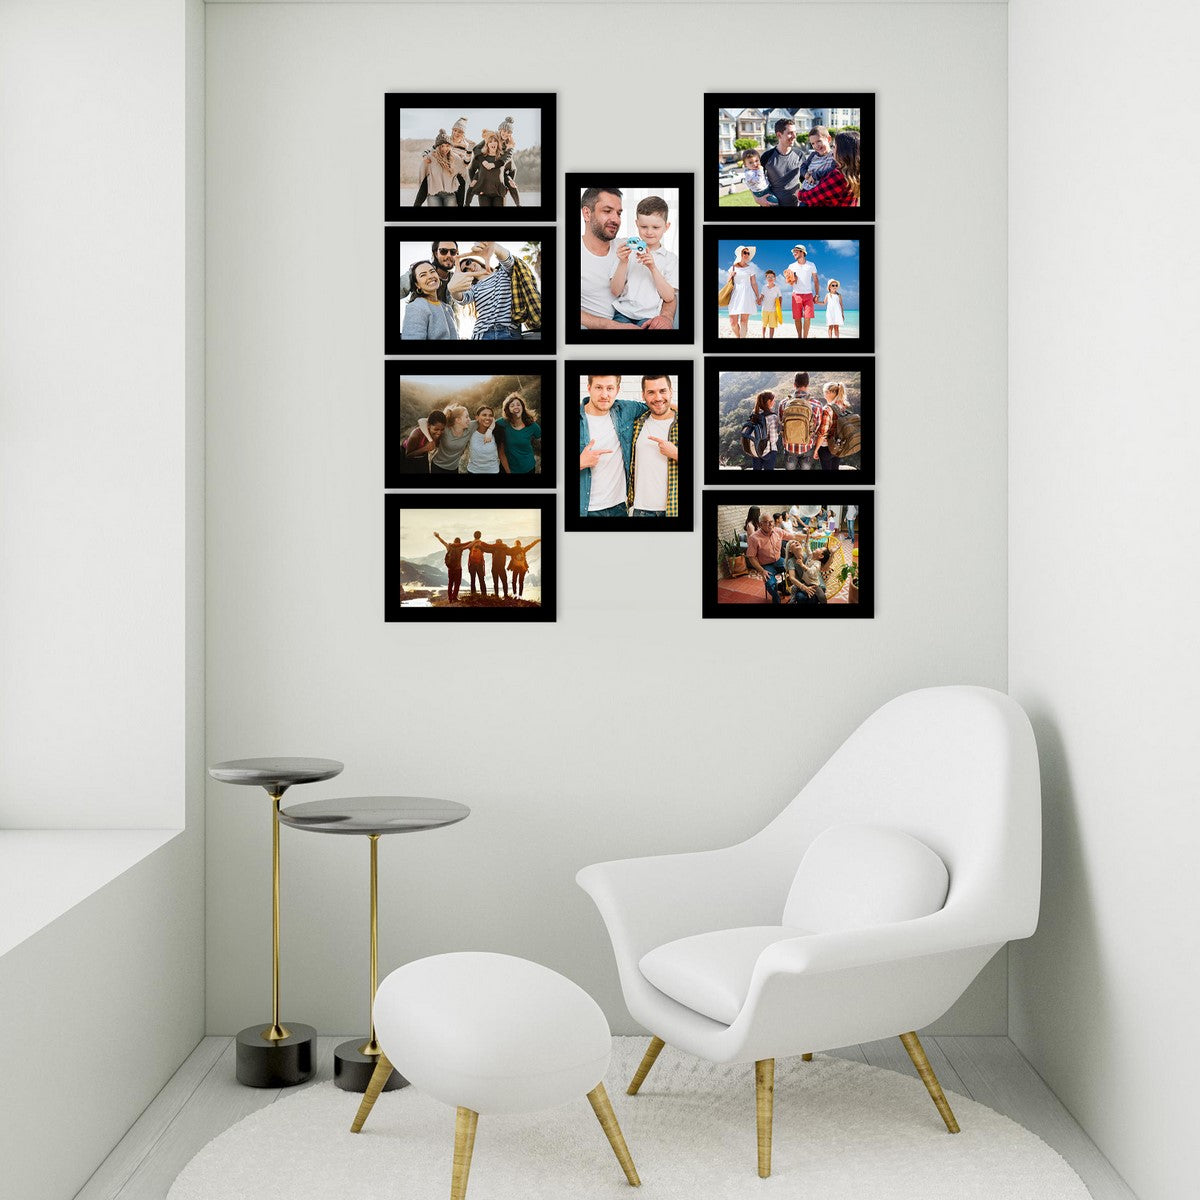 Memory Wall Collage Photo Frame - Set of 10 Photo Frames for 10 Photos of 6"x8" 2